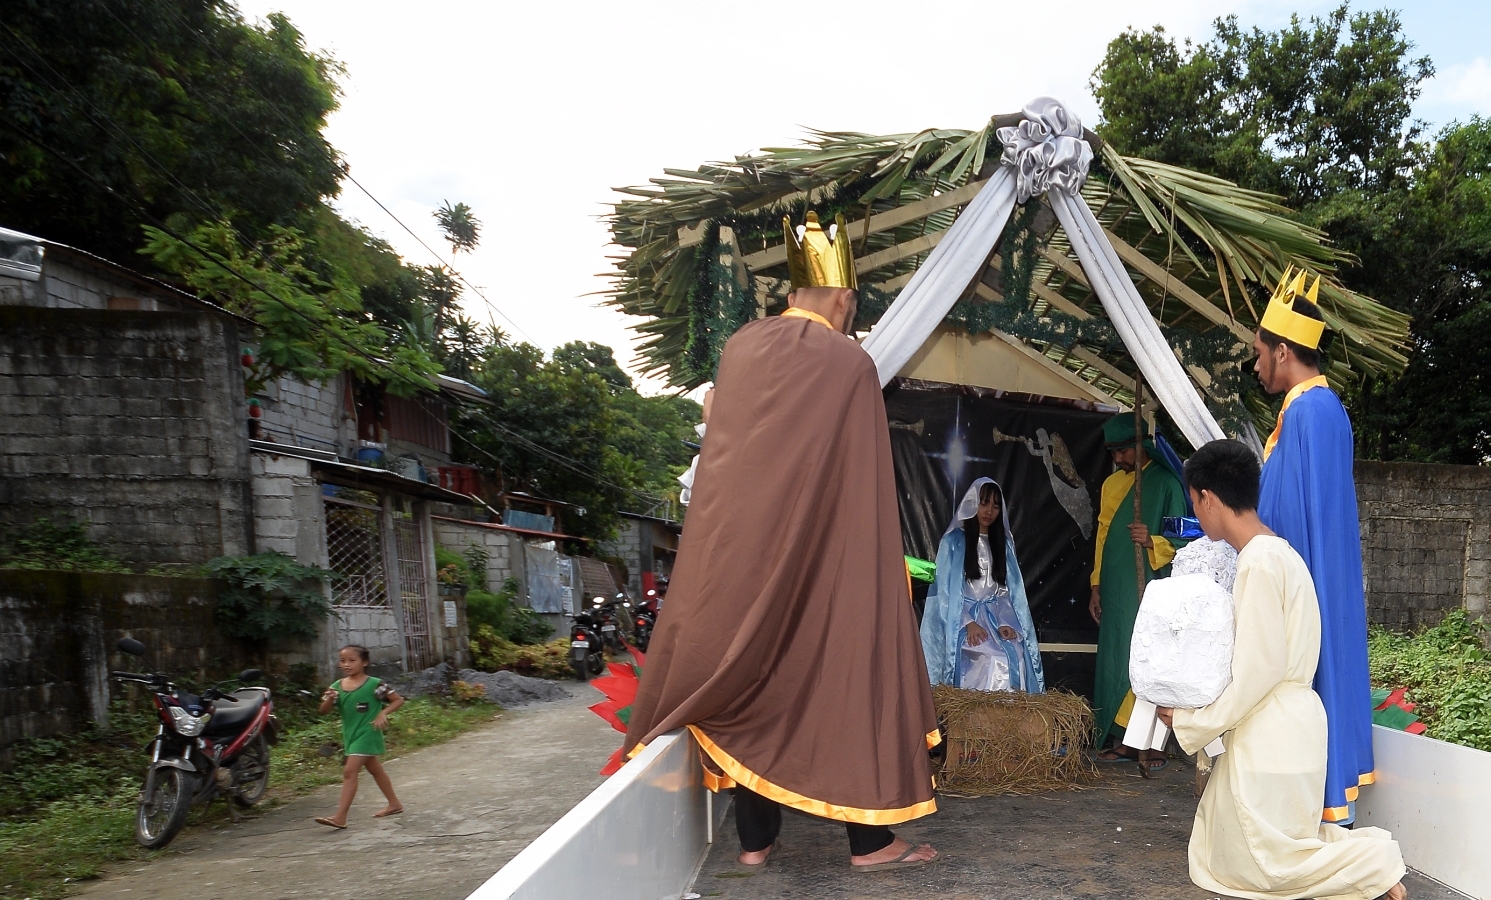 Street children remember birth of Jesus in ‘carroza’ pageant